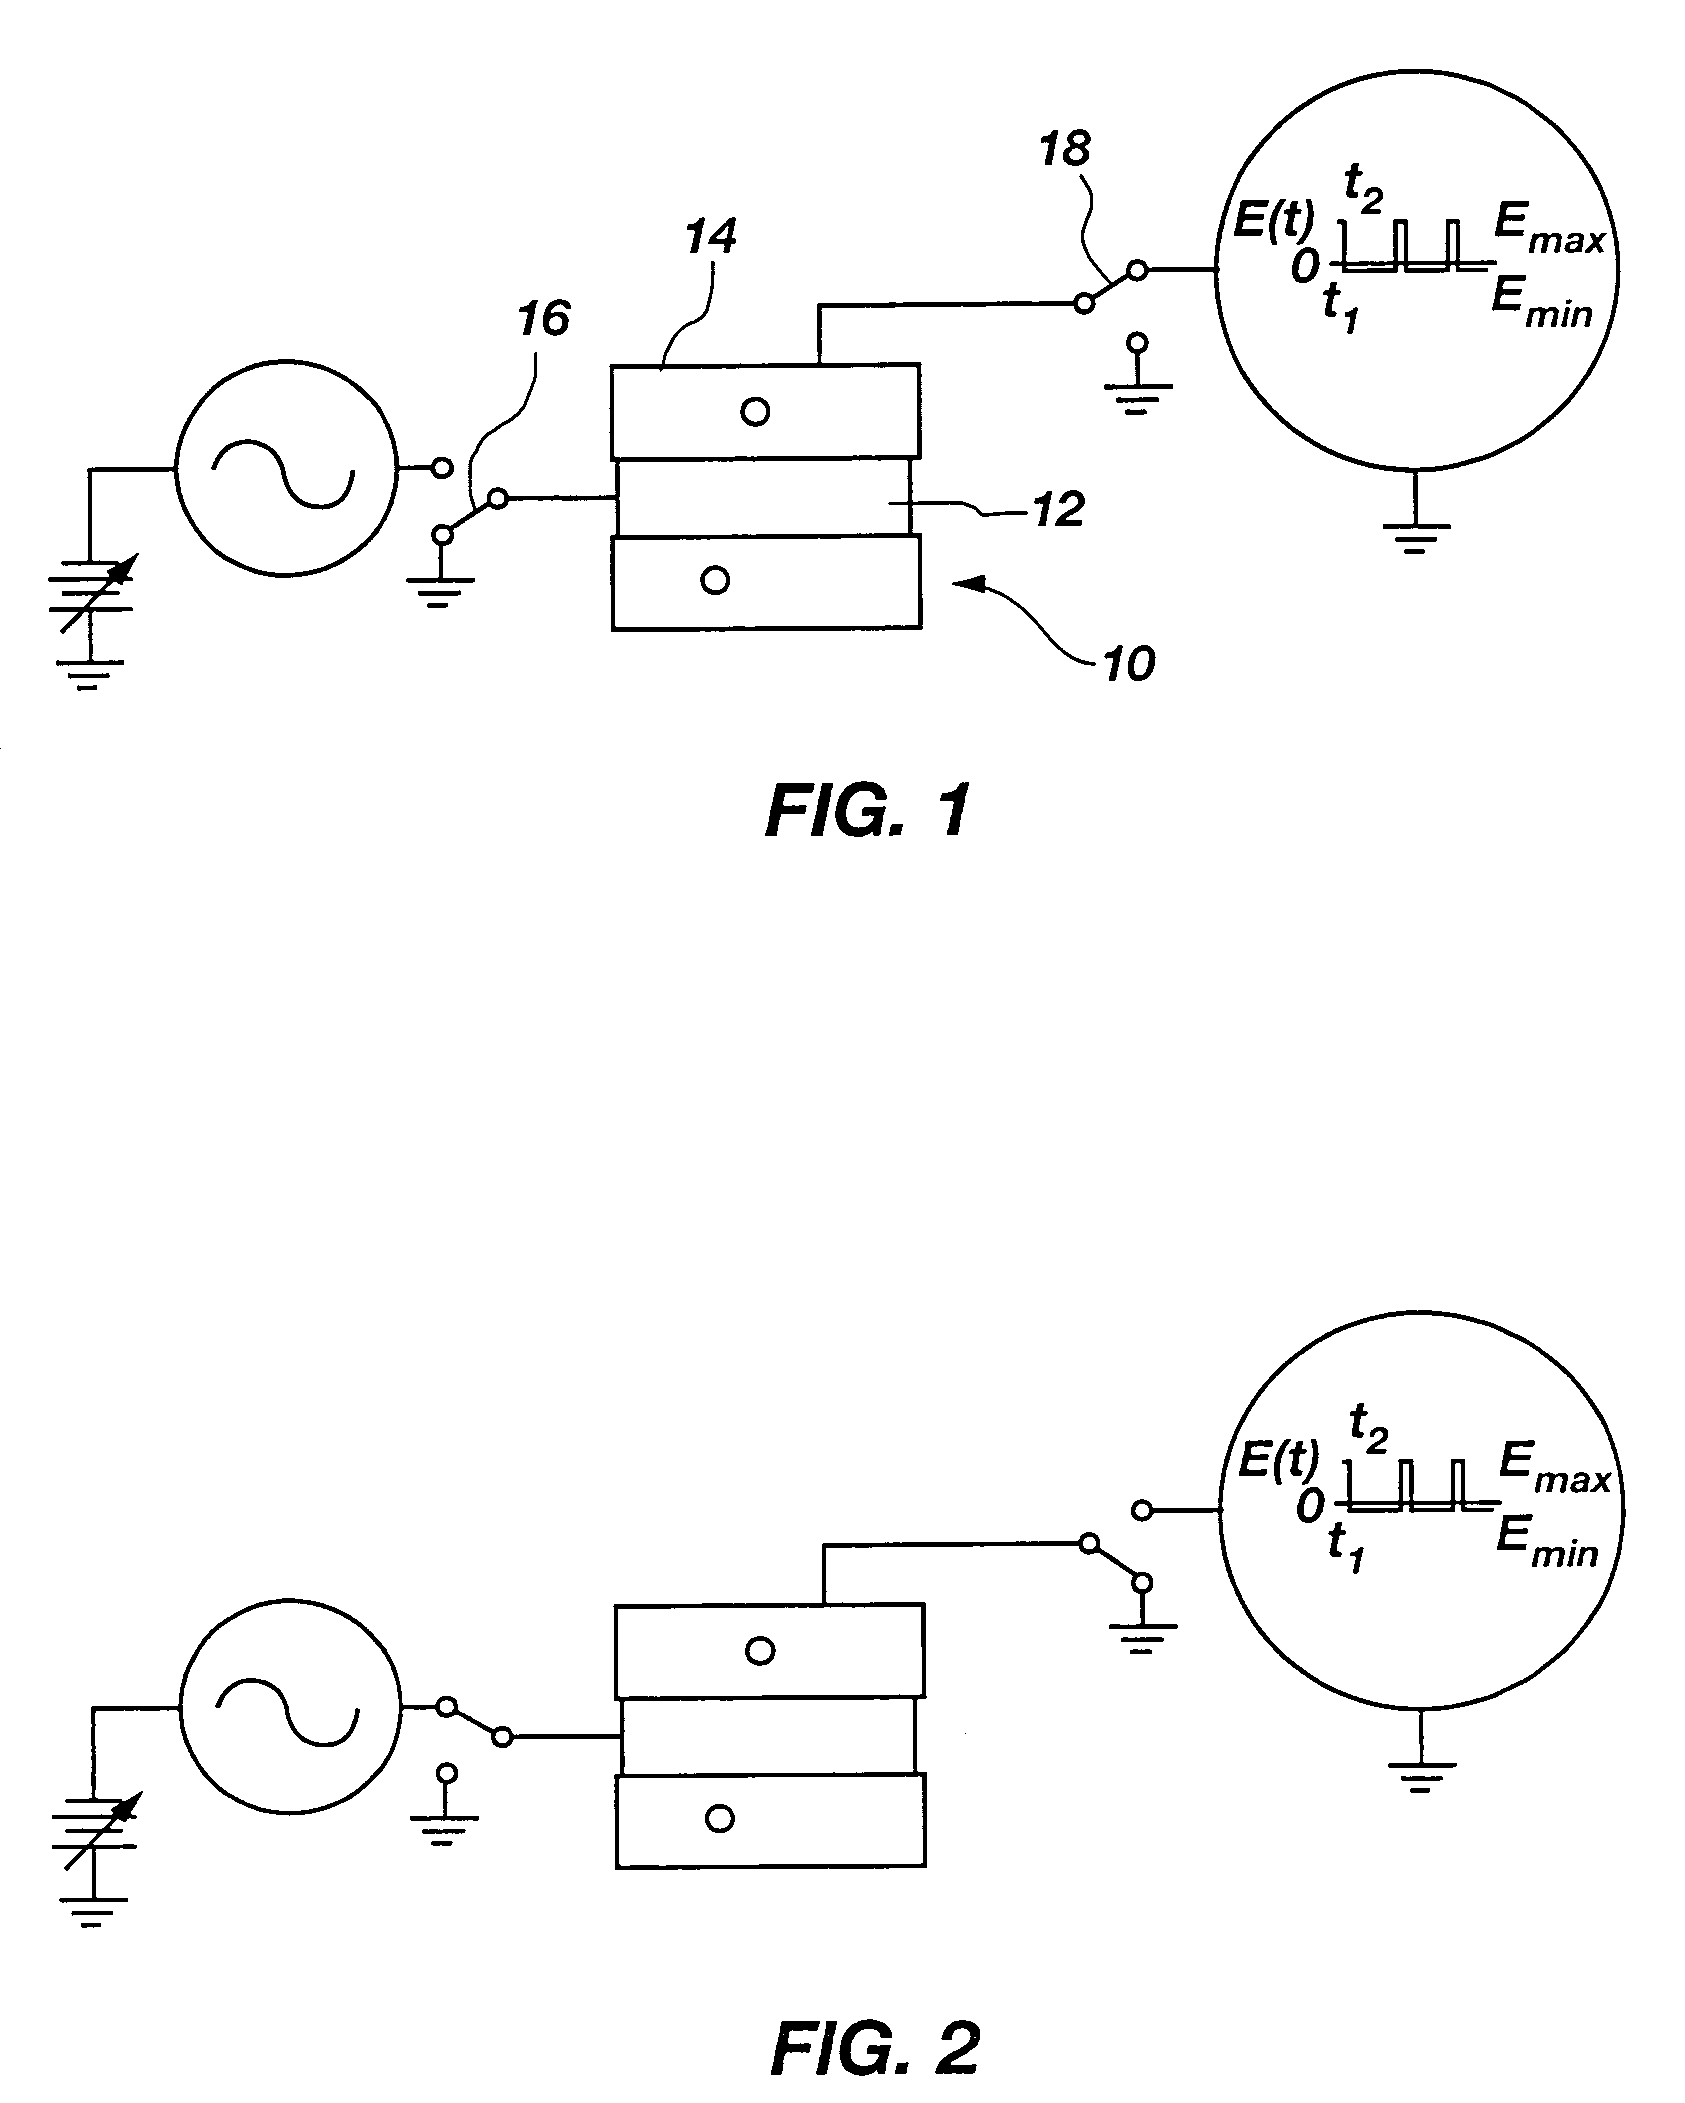 Single device for ion mobility and ion trap mass spectrometry